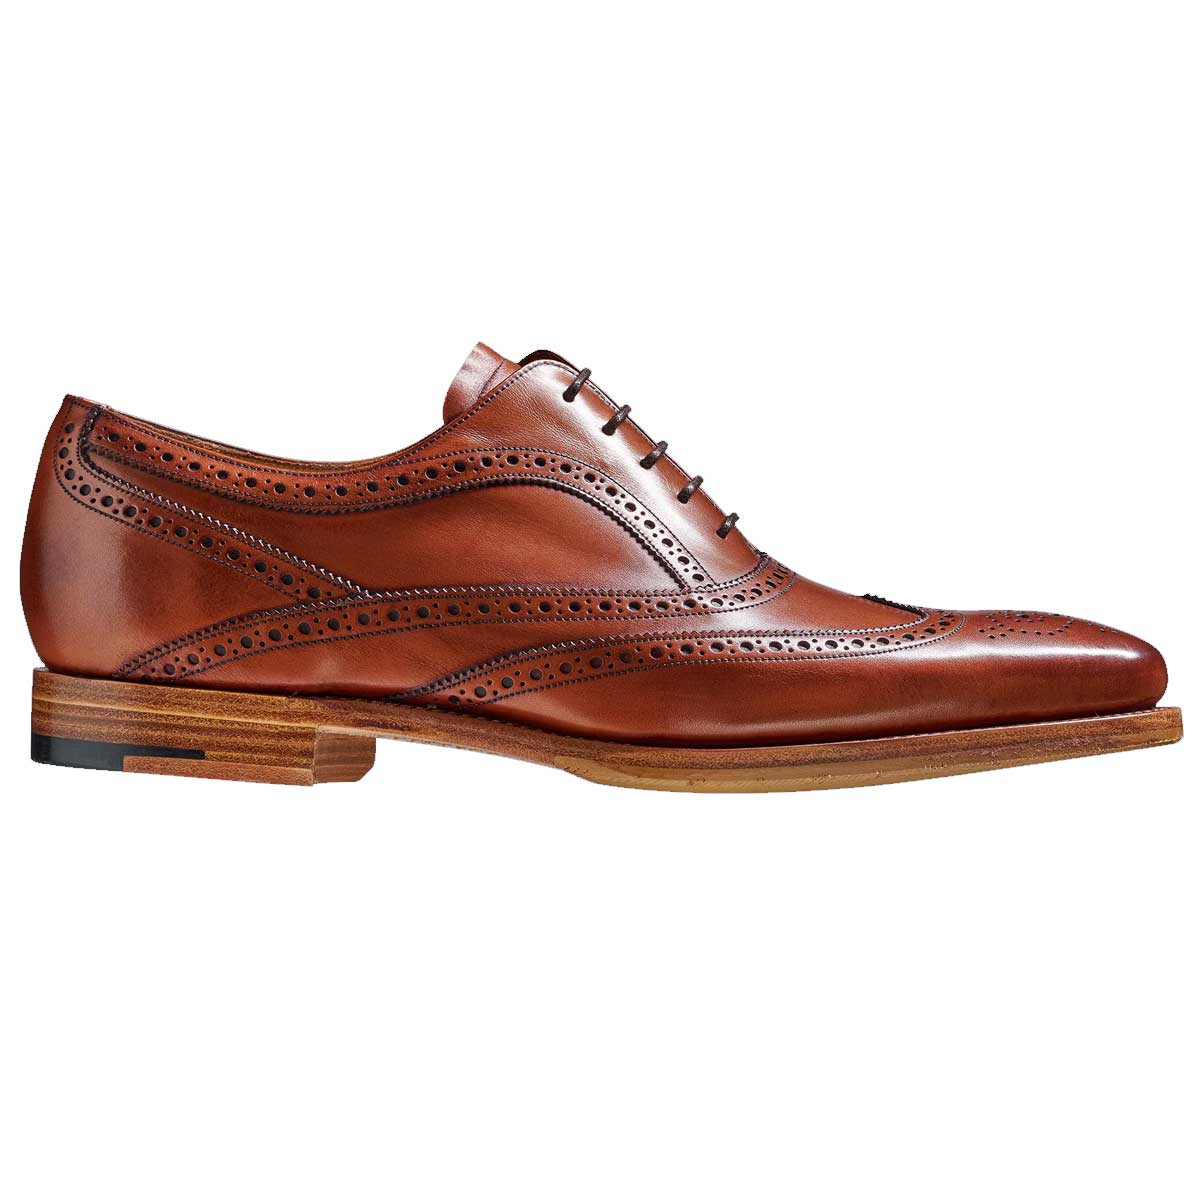 BARKER Turing Shoes - Antique Rosewood Calf